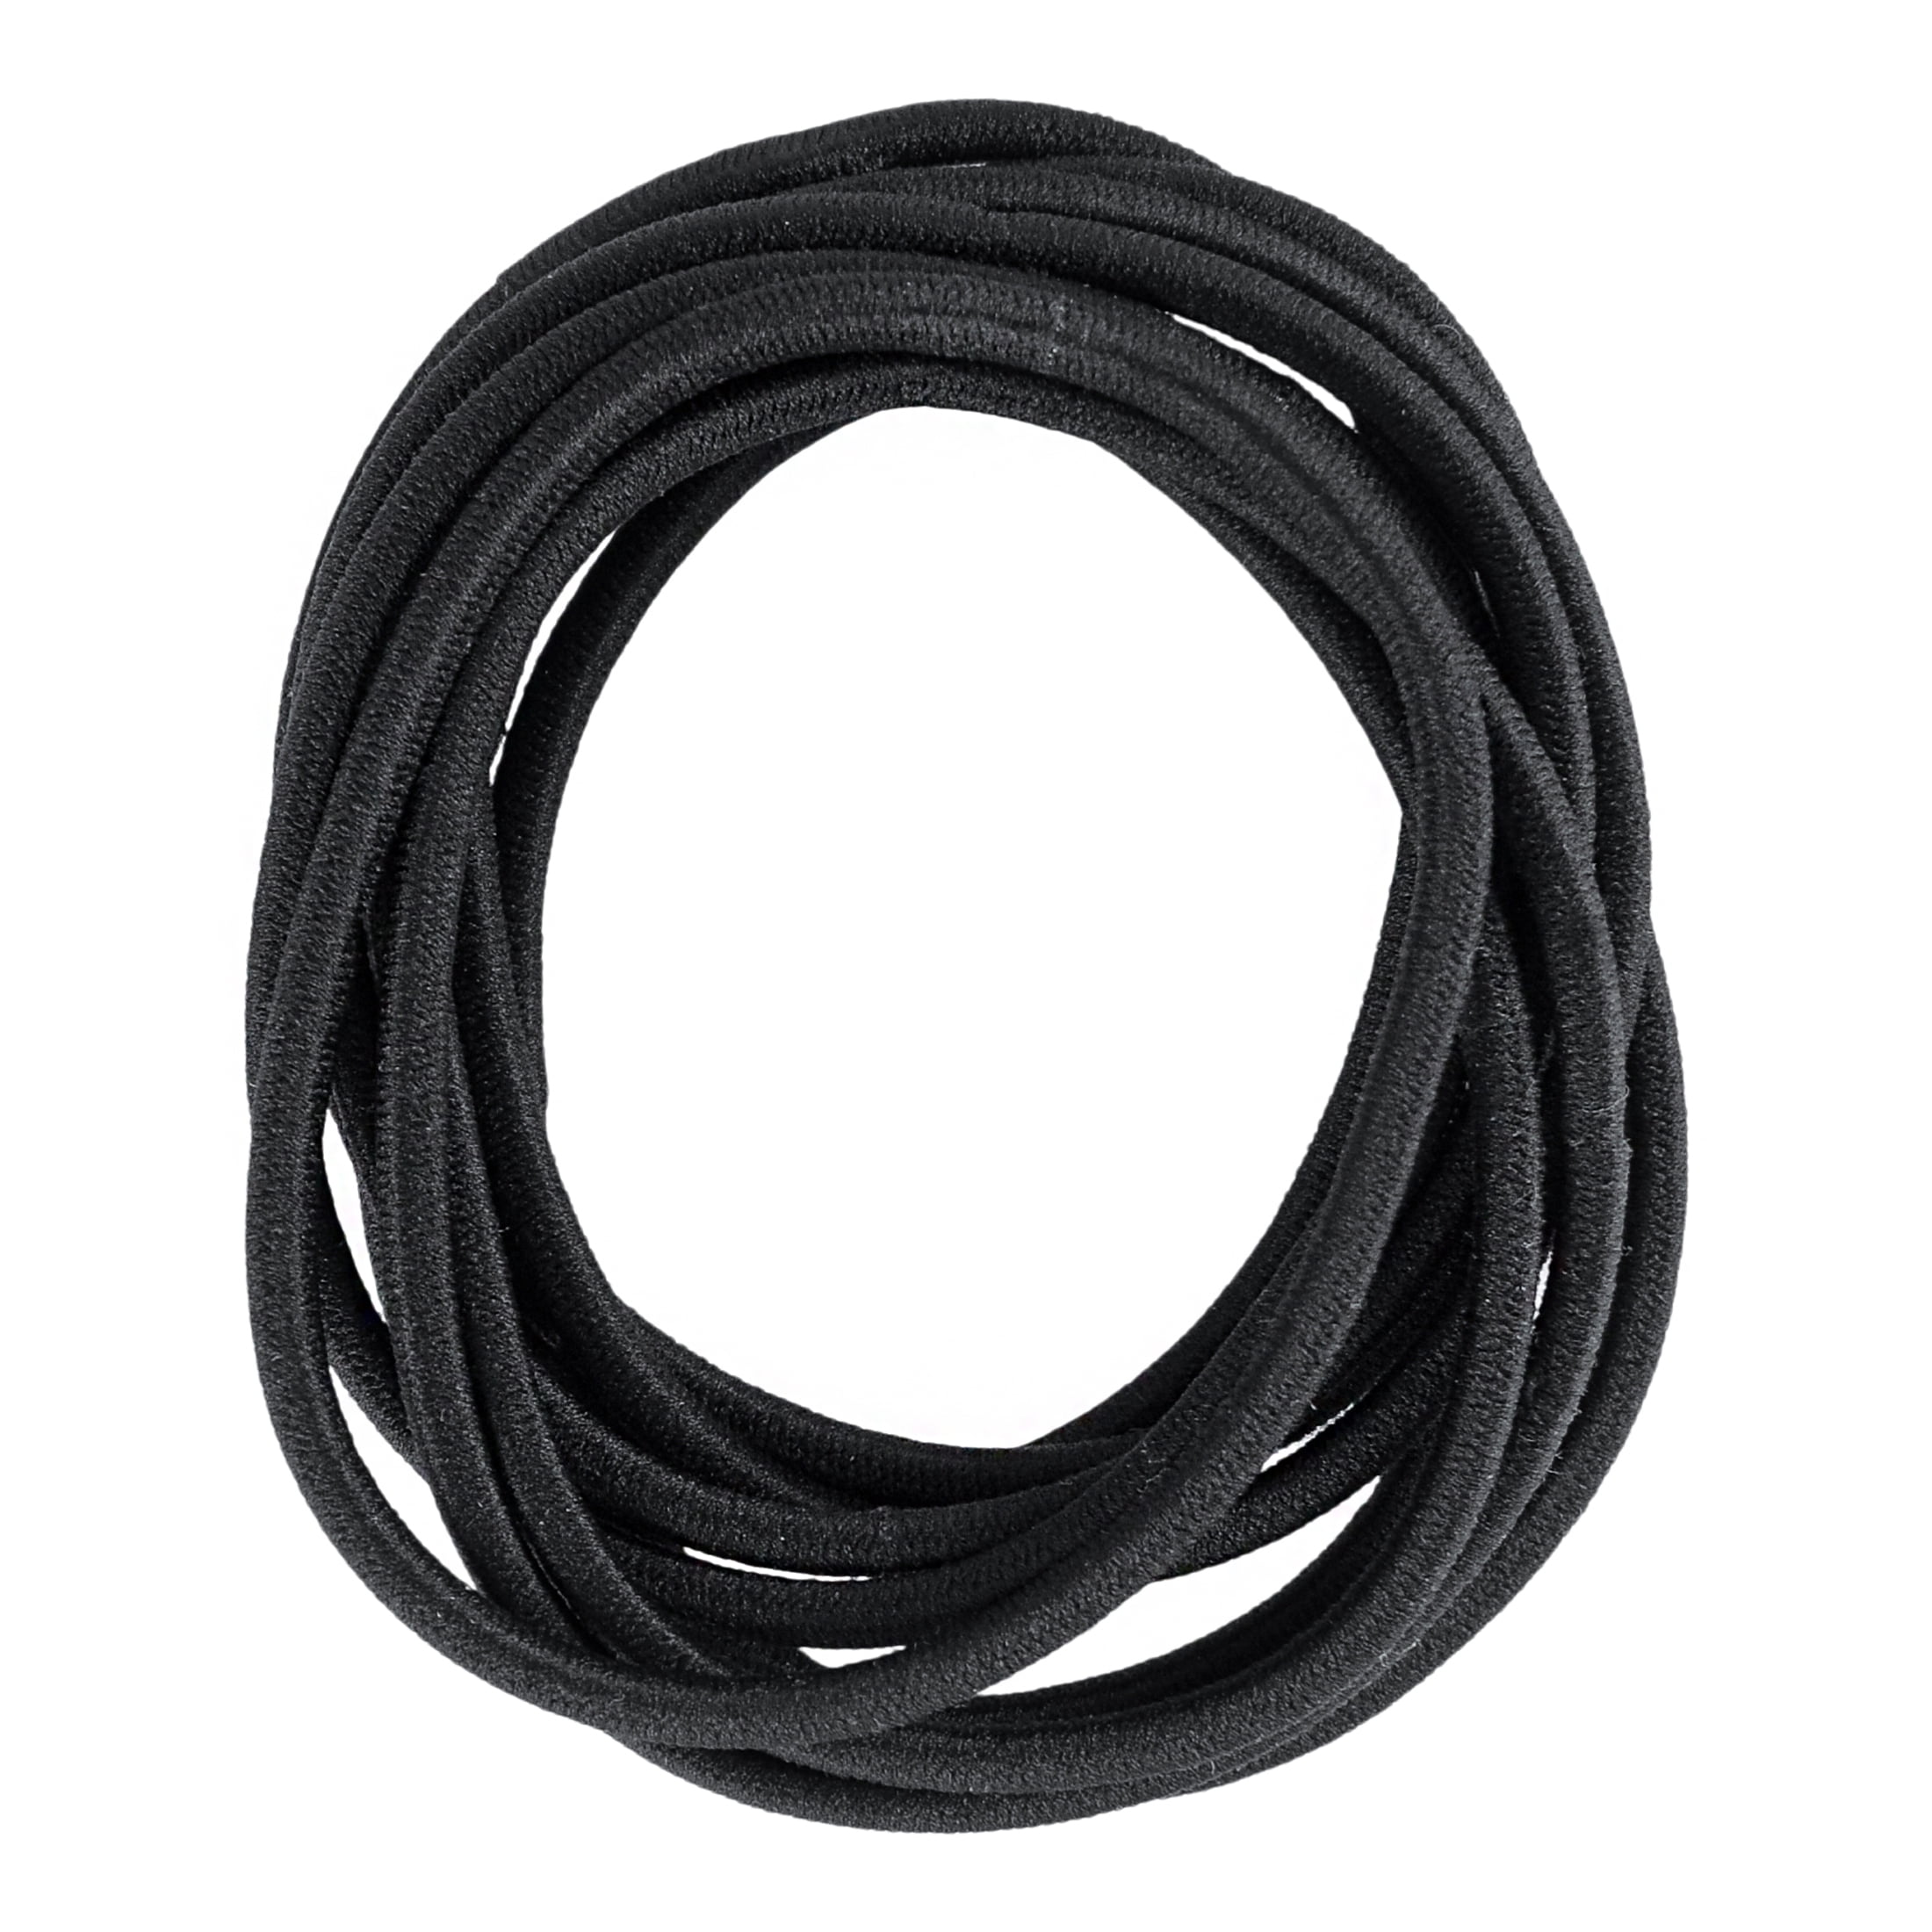 Scunci Nylon Elastic Hairbands With Larger Opening and Better Stretch for  Extra-Thick Hair in Black, 10ct 